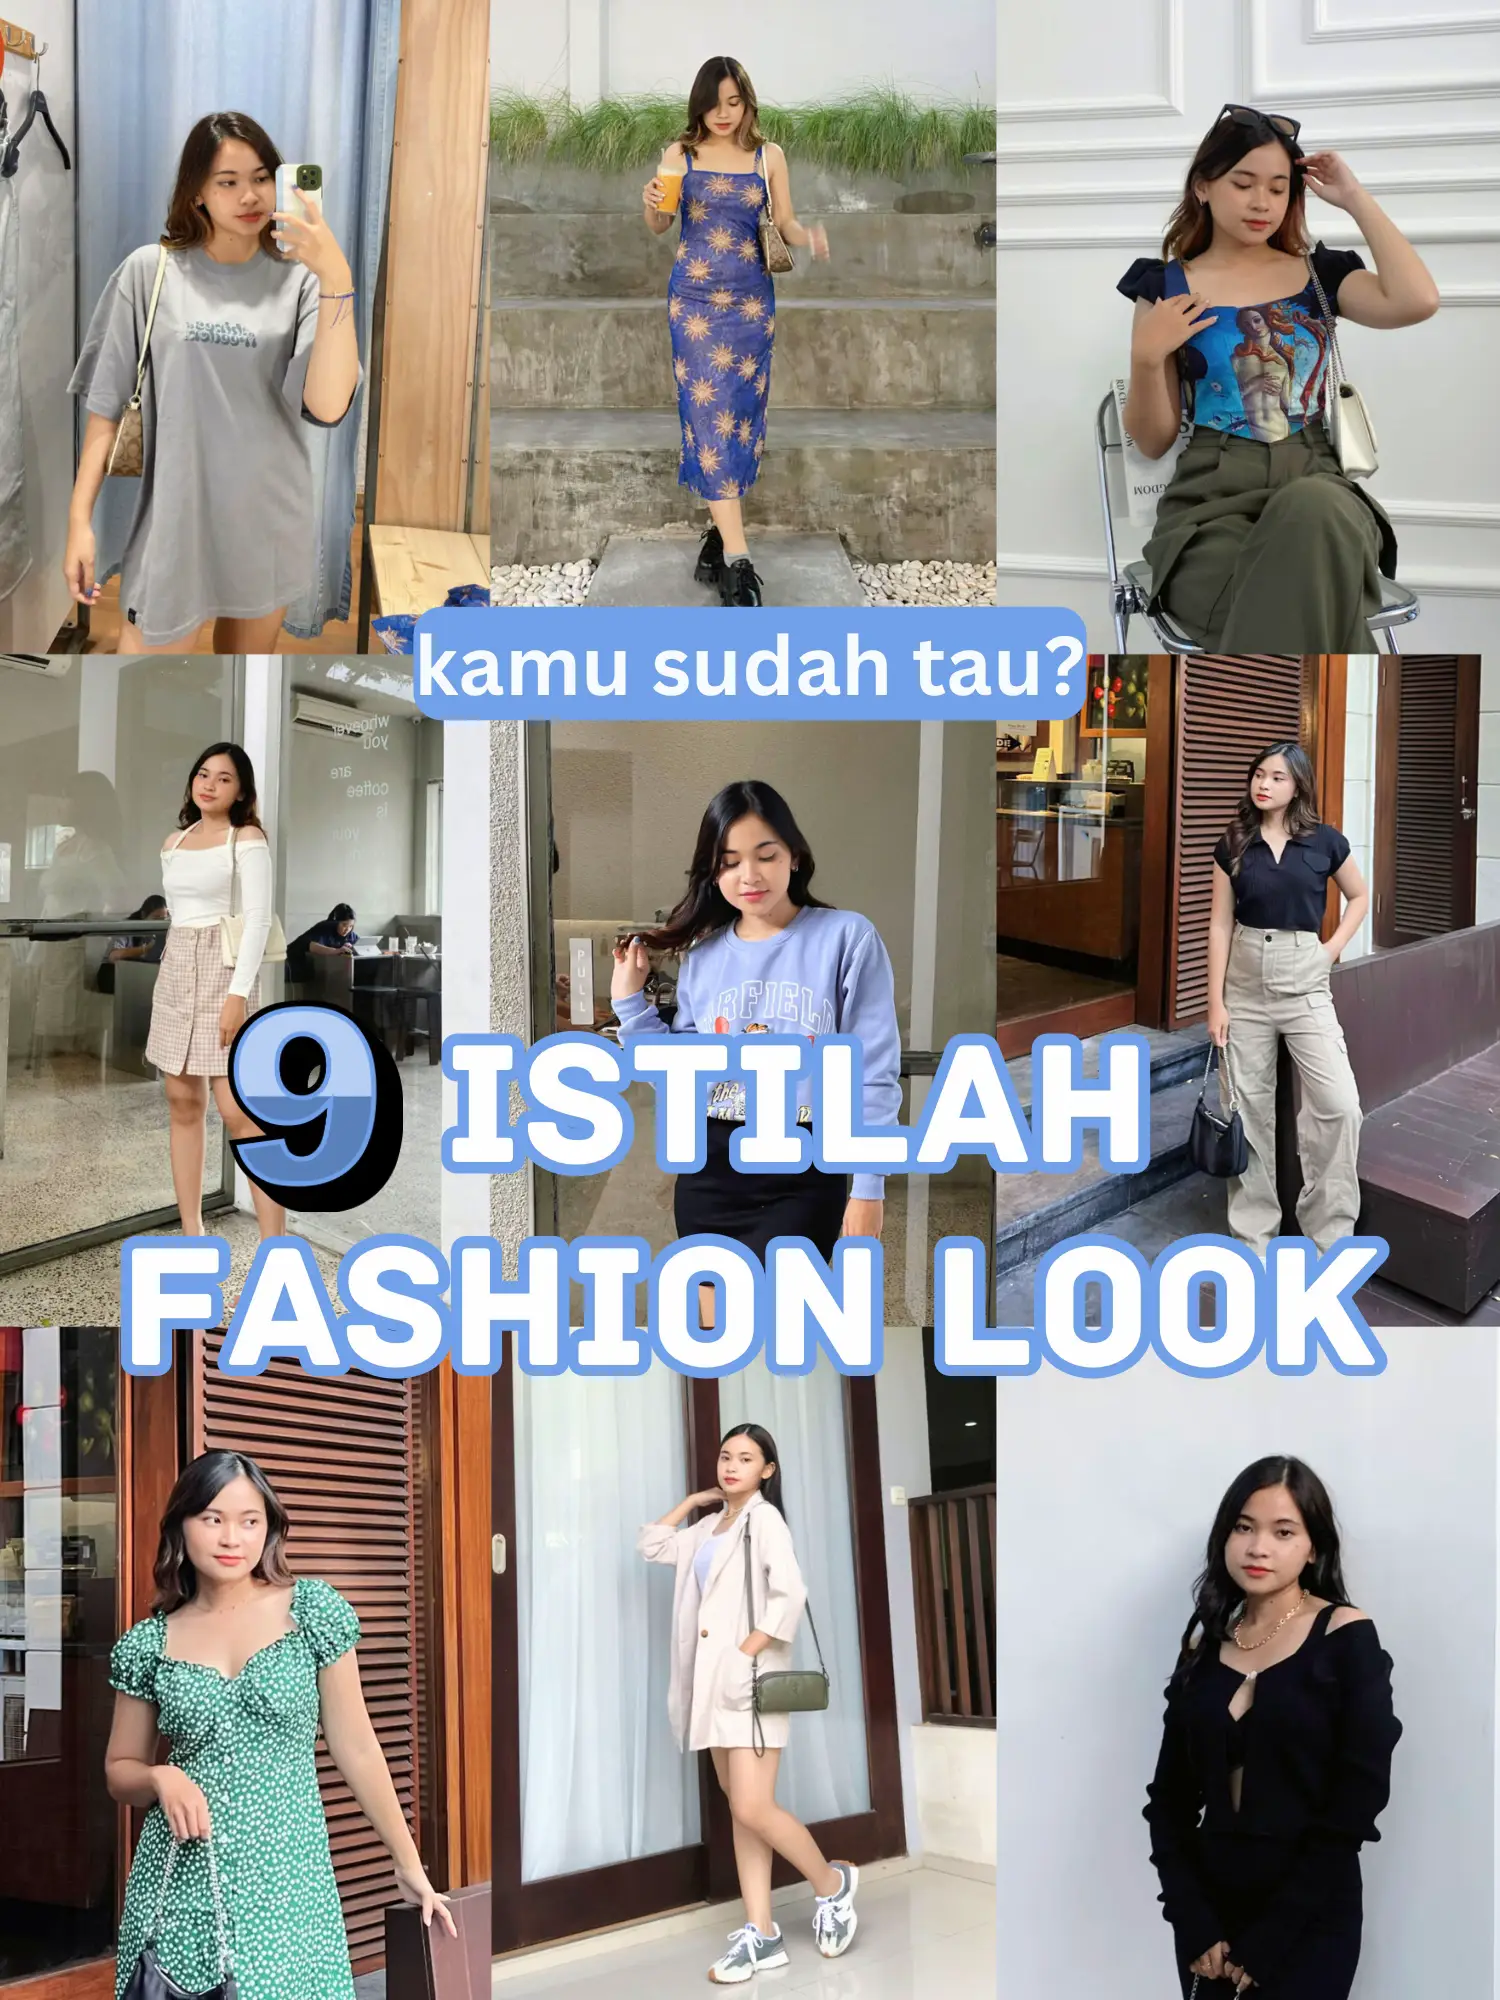 ❕9 jenis Fashion Look❕'s images